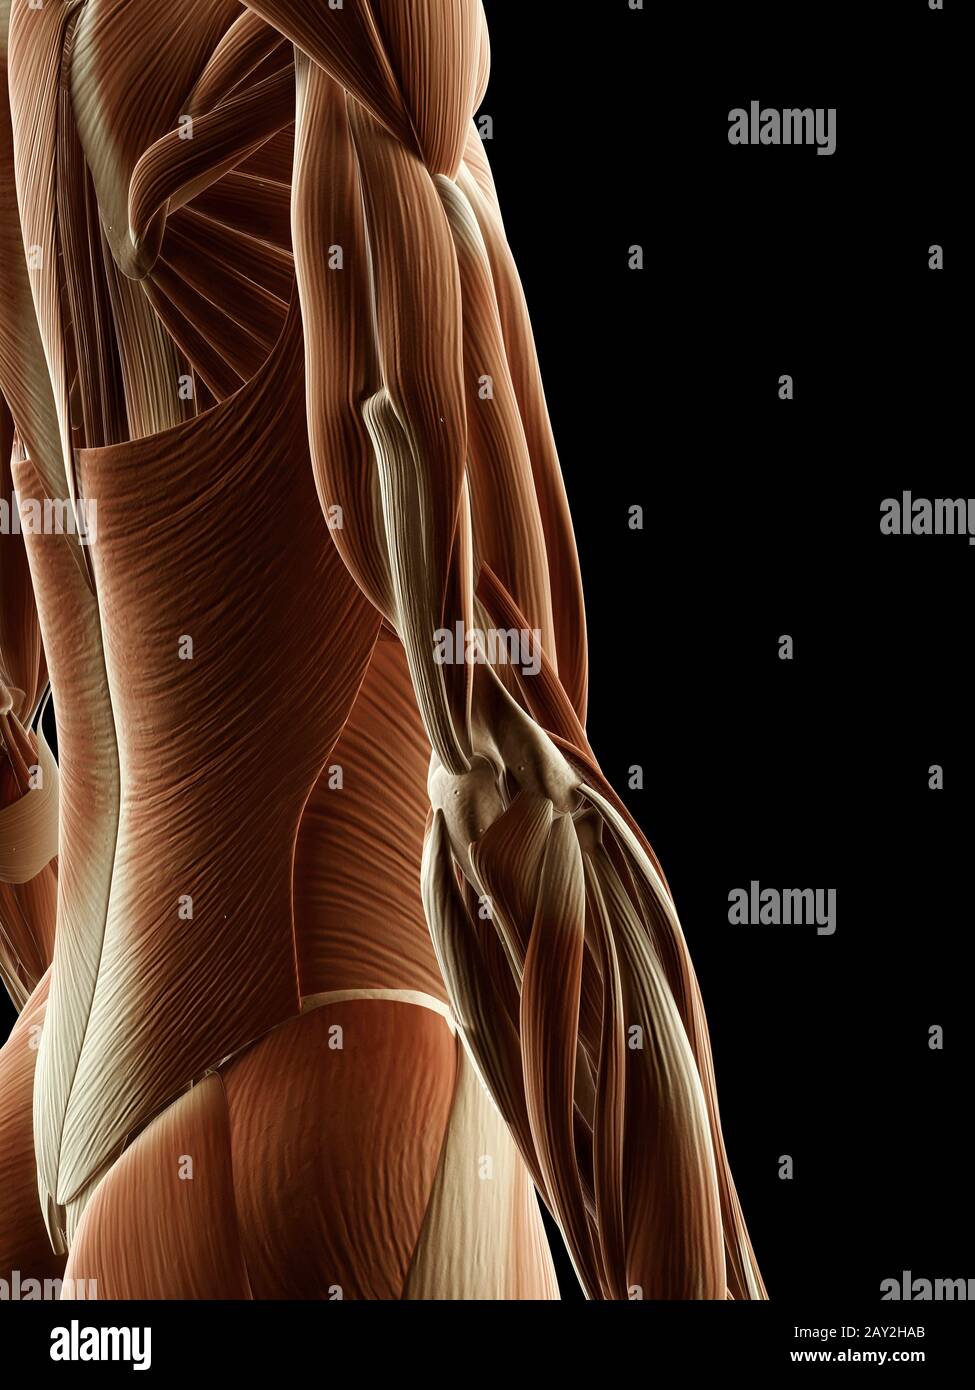 medical illustration of arm muscles Stock Photo